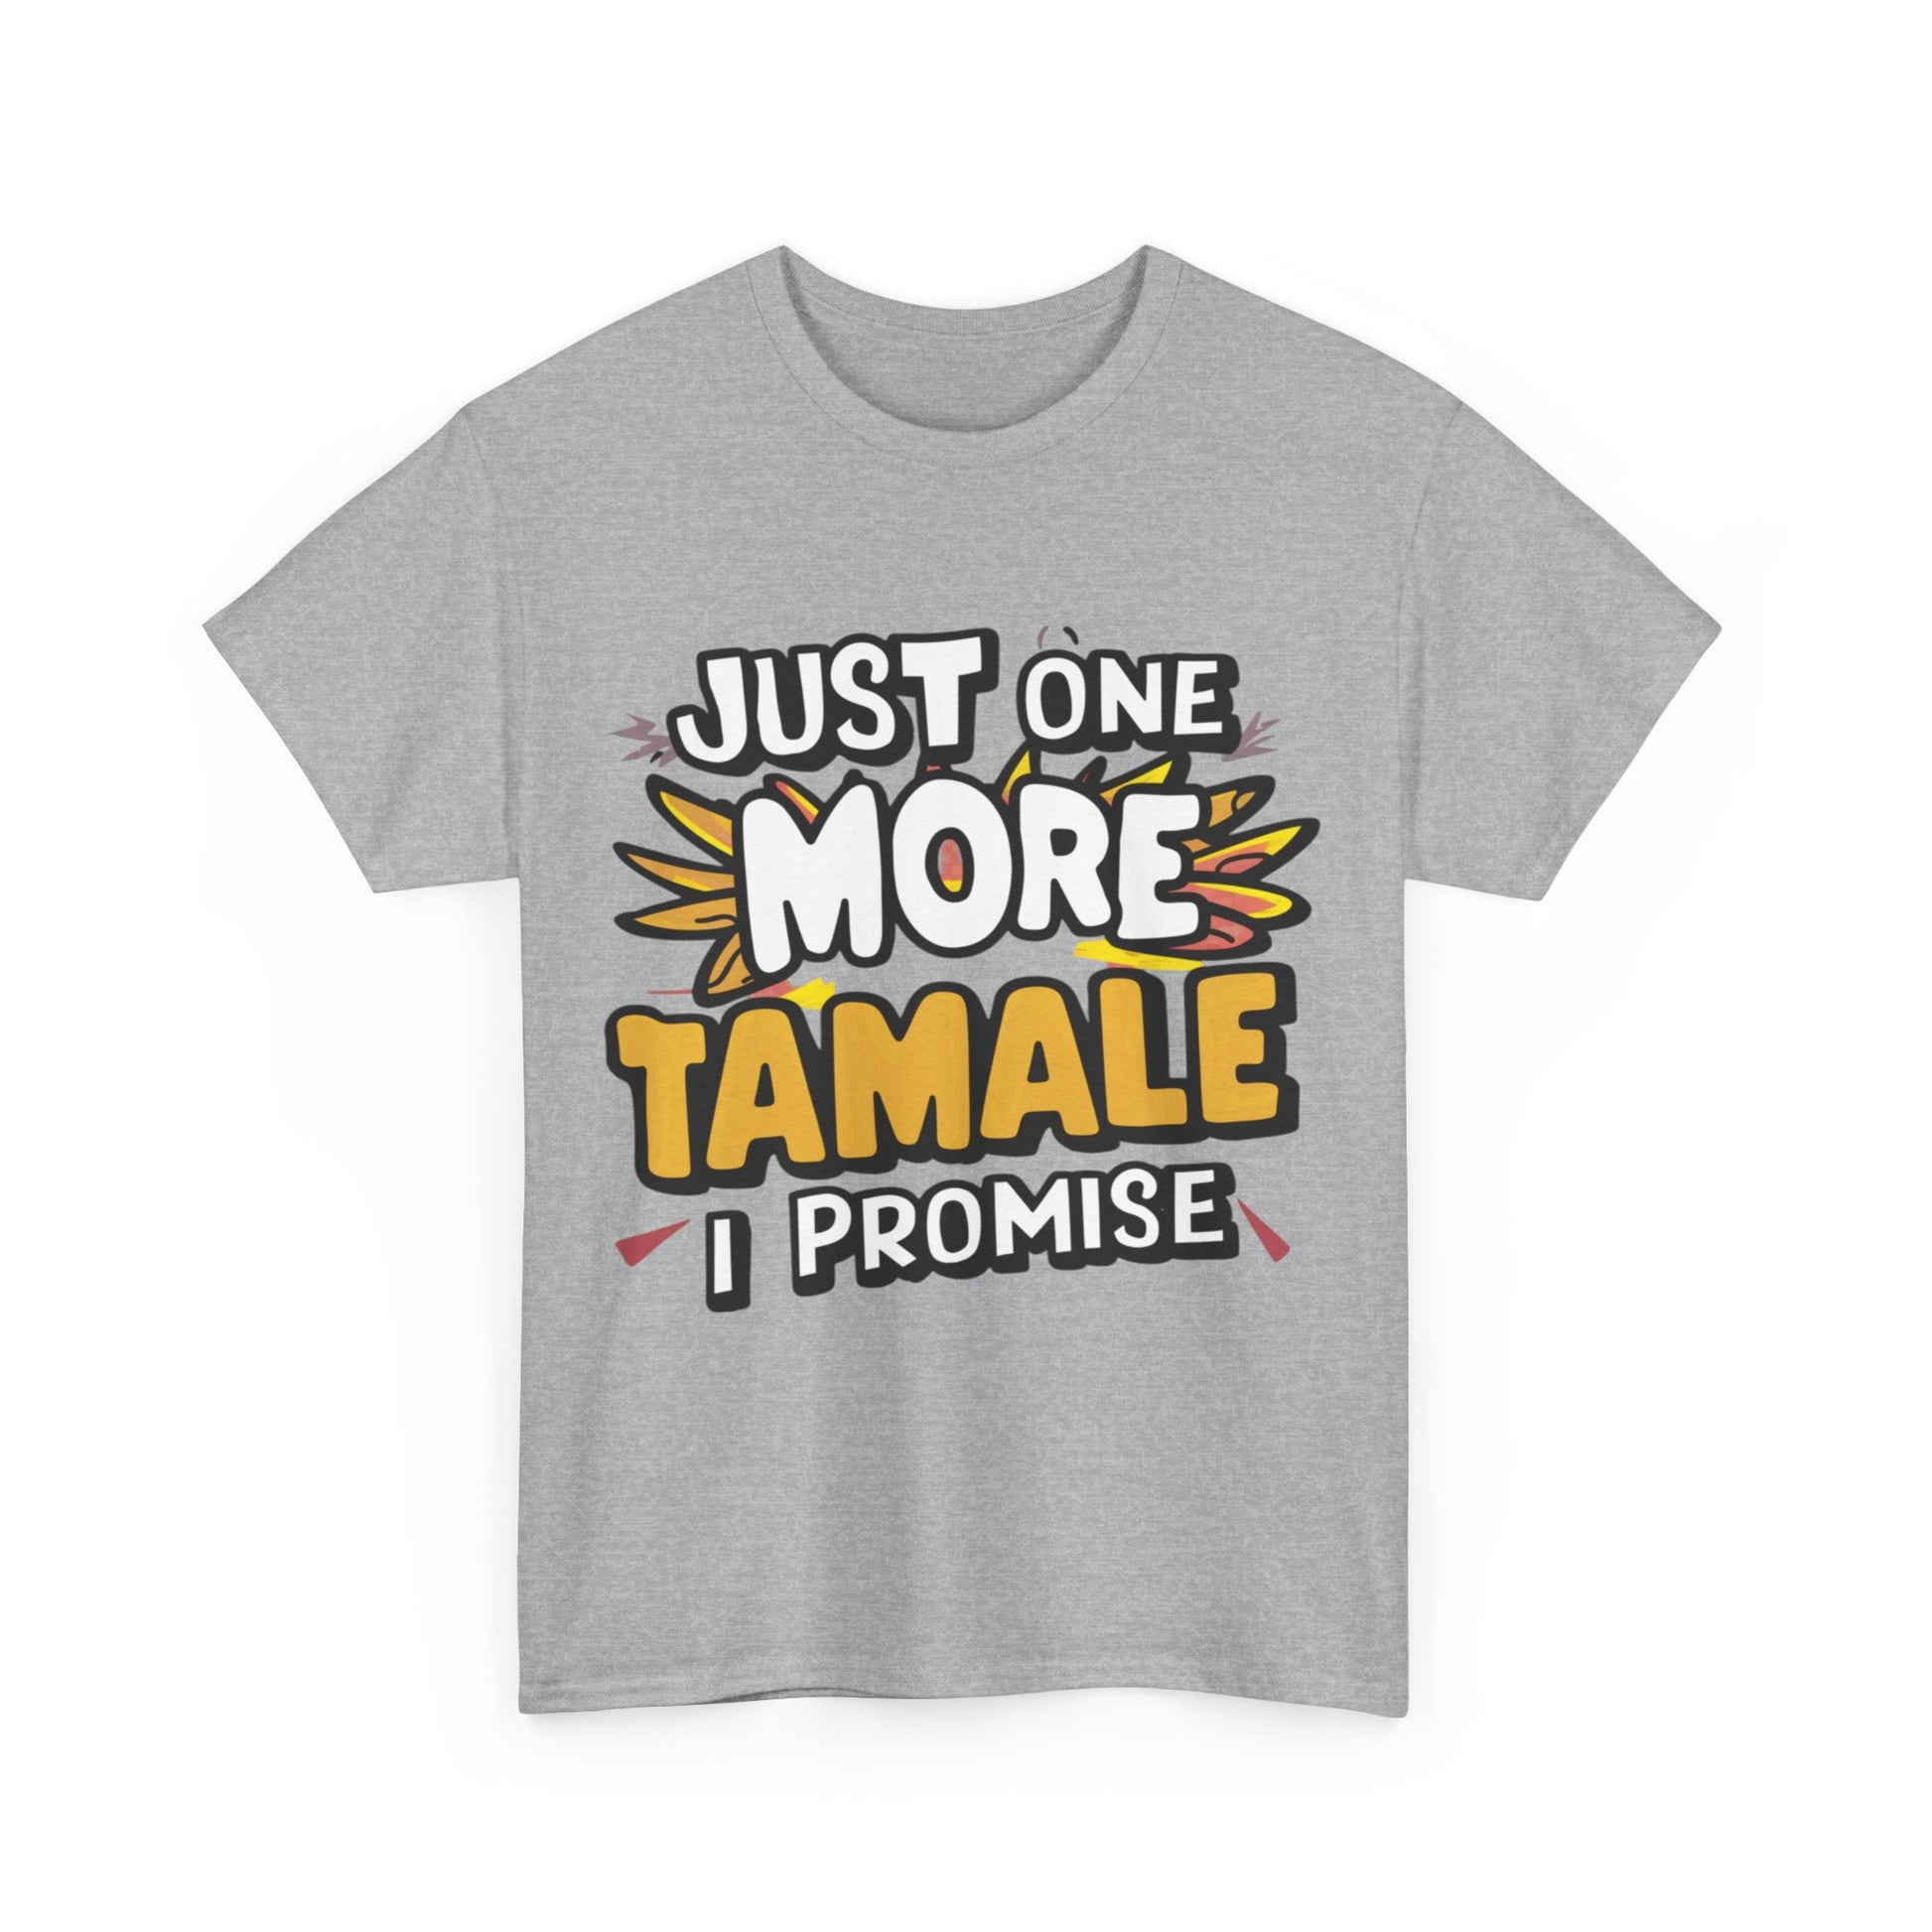 Just One More Tamale I Promise Mexican Food Graphic Unisex Heavy Cotton Tee Cotton Funny Humorous Graphic Soft Premium Unisex Men Women Sport Grey T-shirt Birthday Gift-39